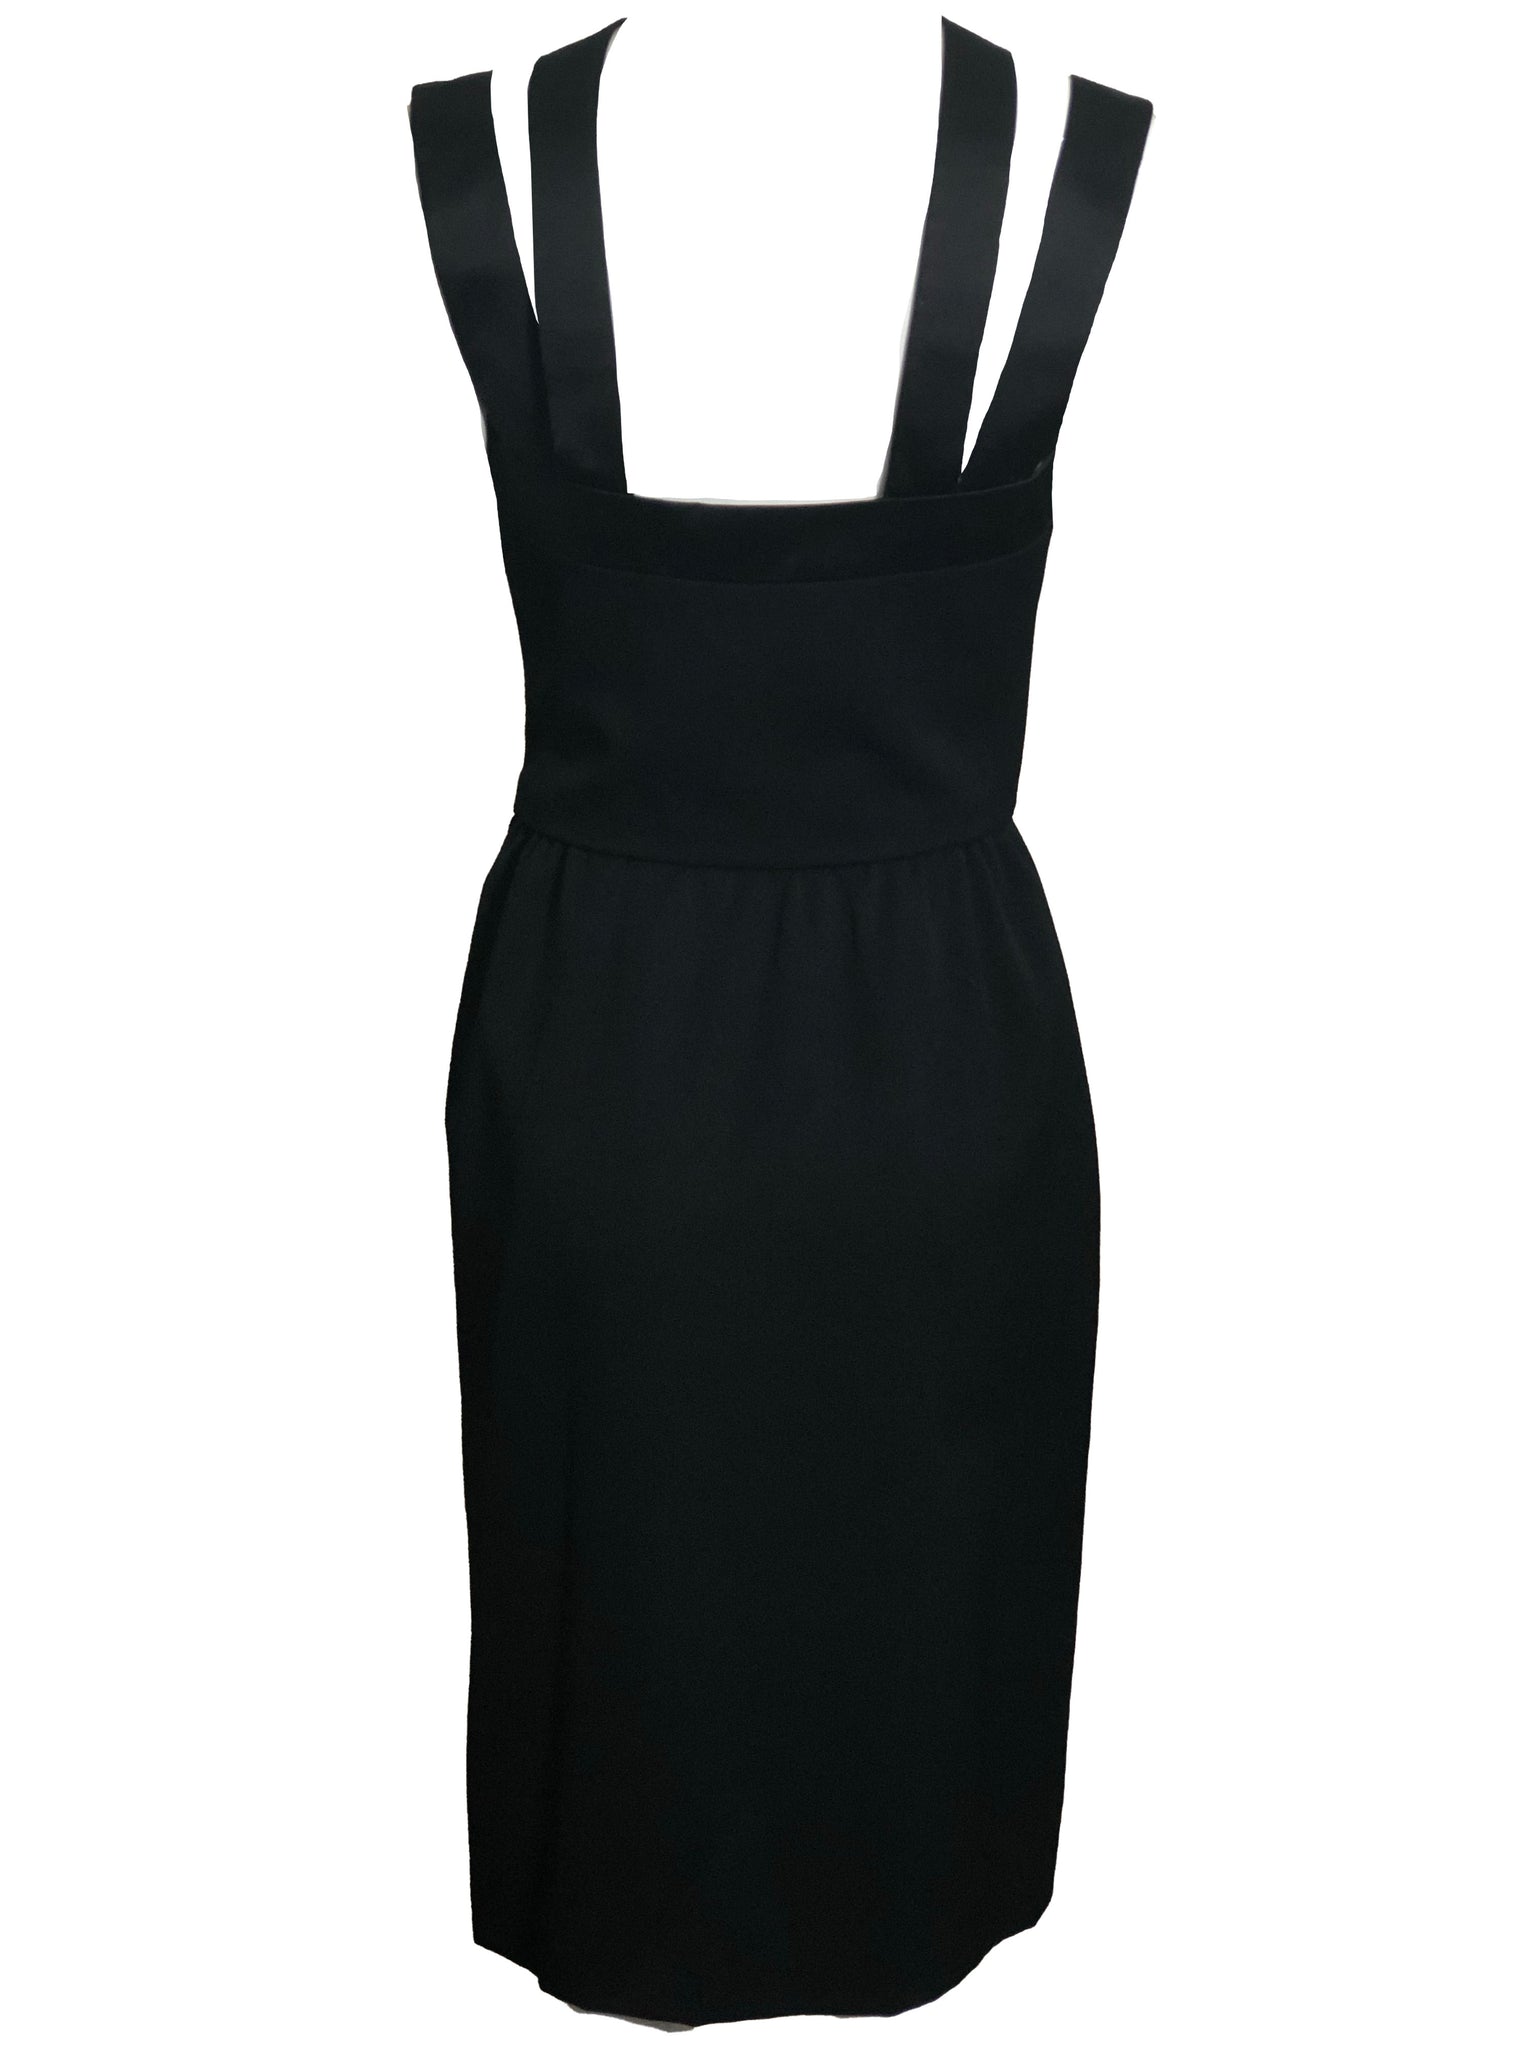 Givenchy Tuxedo Style Cocktail Dress – THE WAY WE WORE